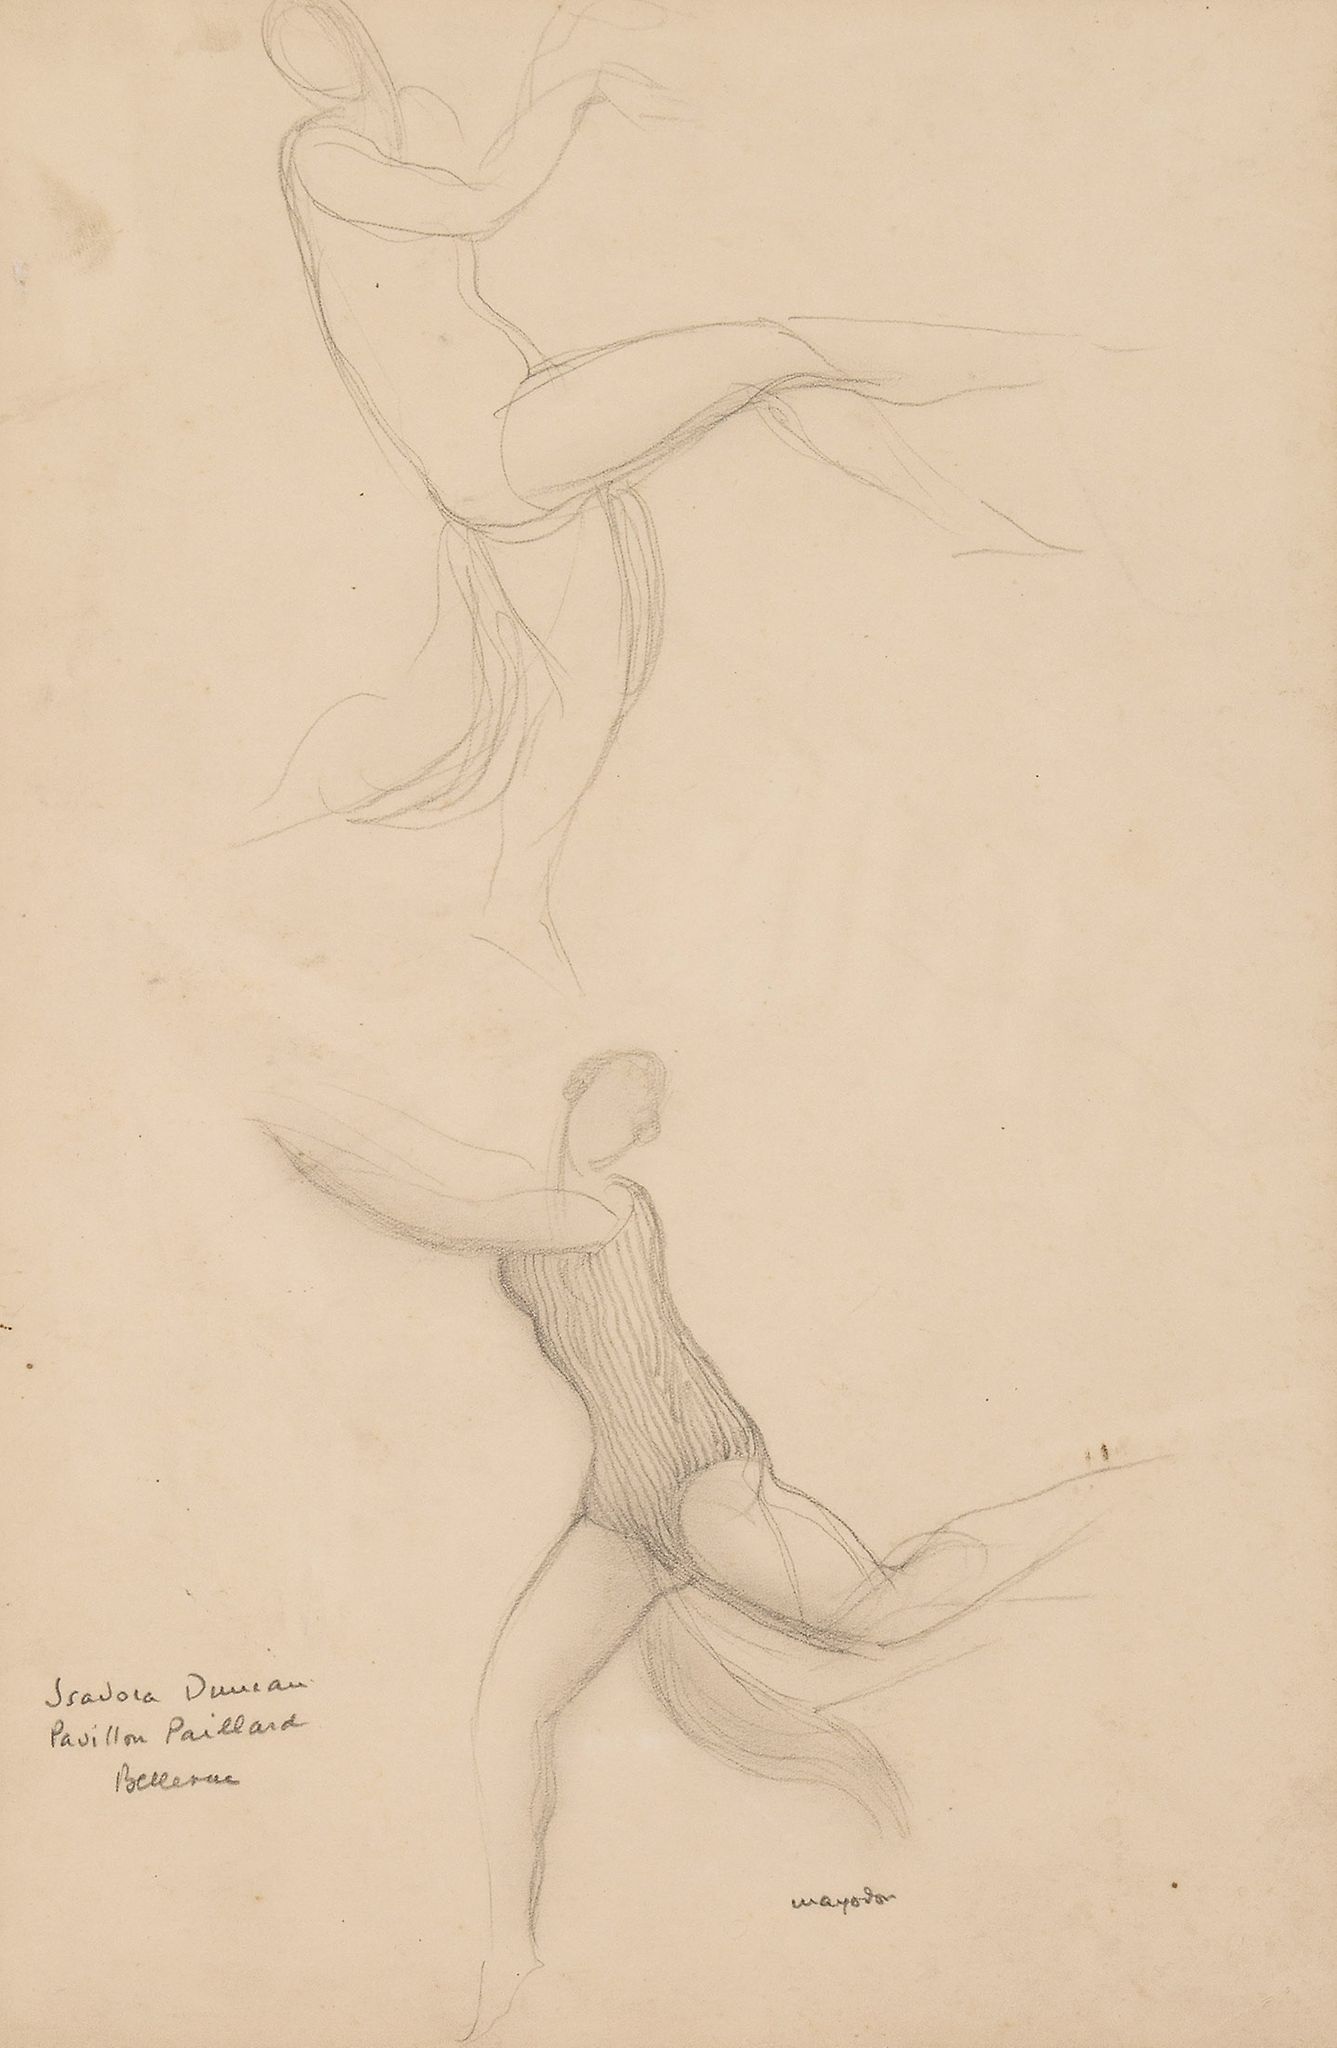 Jean Mayodon (1893-1967) - Isadora Duncan Dancing pencil on paper, signed in pencil at lower middle,